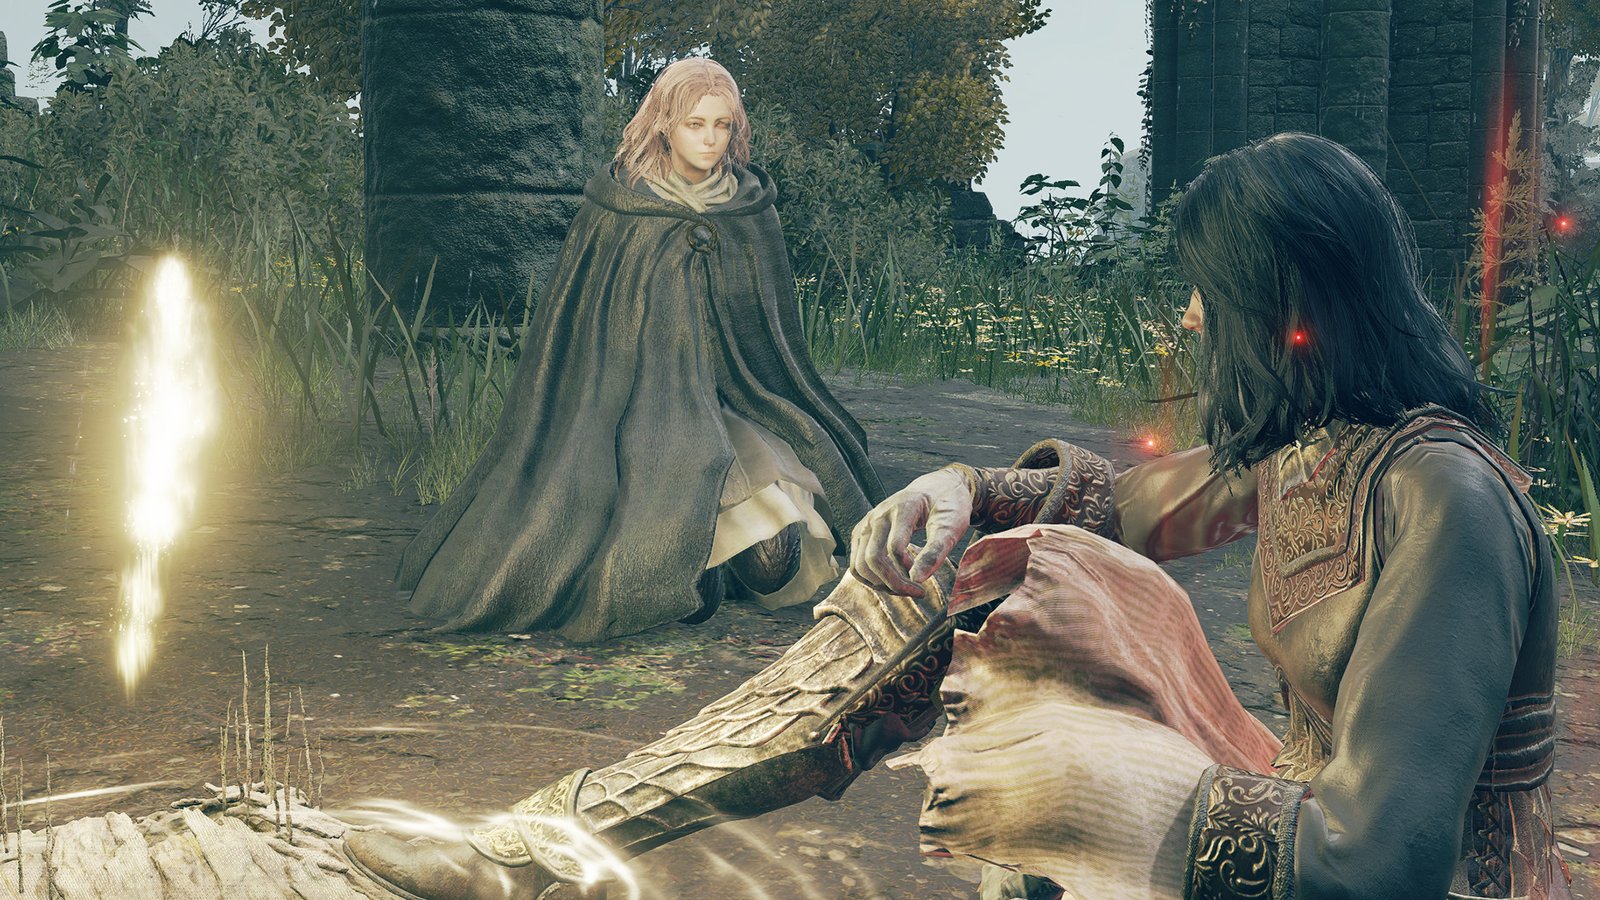 Elden Ring's Melina speaking with player character